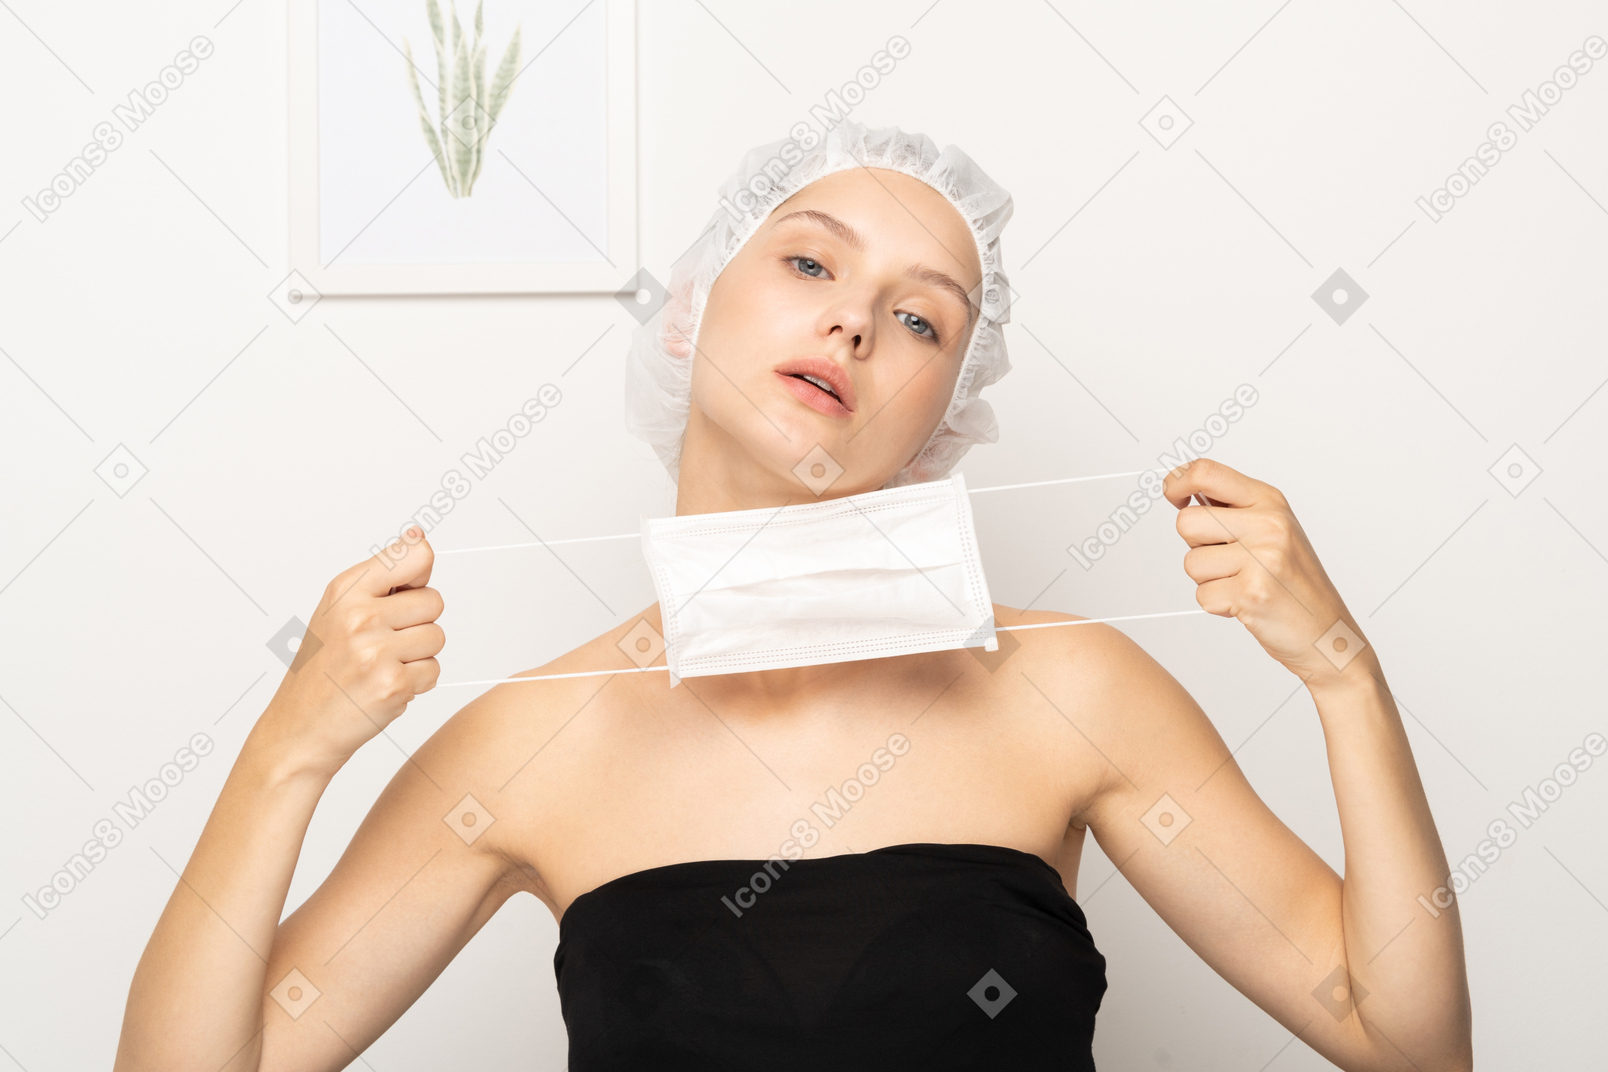 Young woman stretching mask while looking at camera